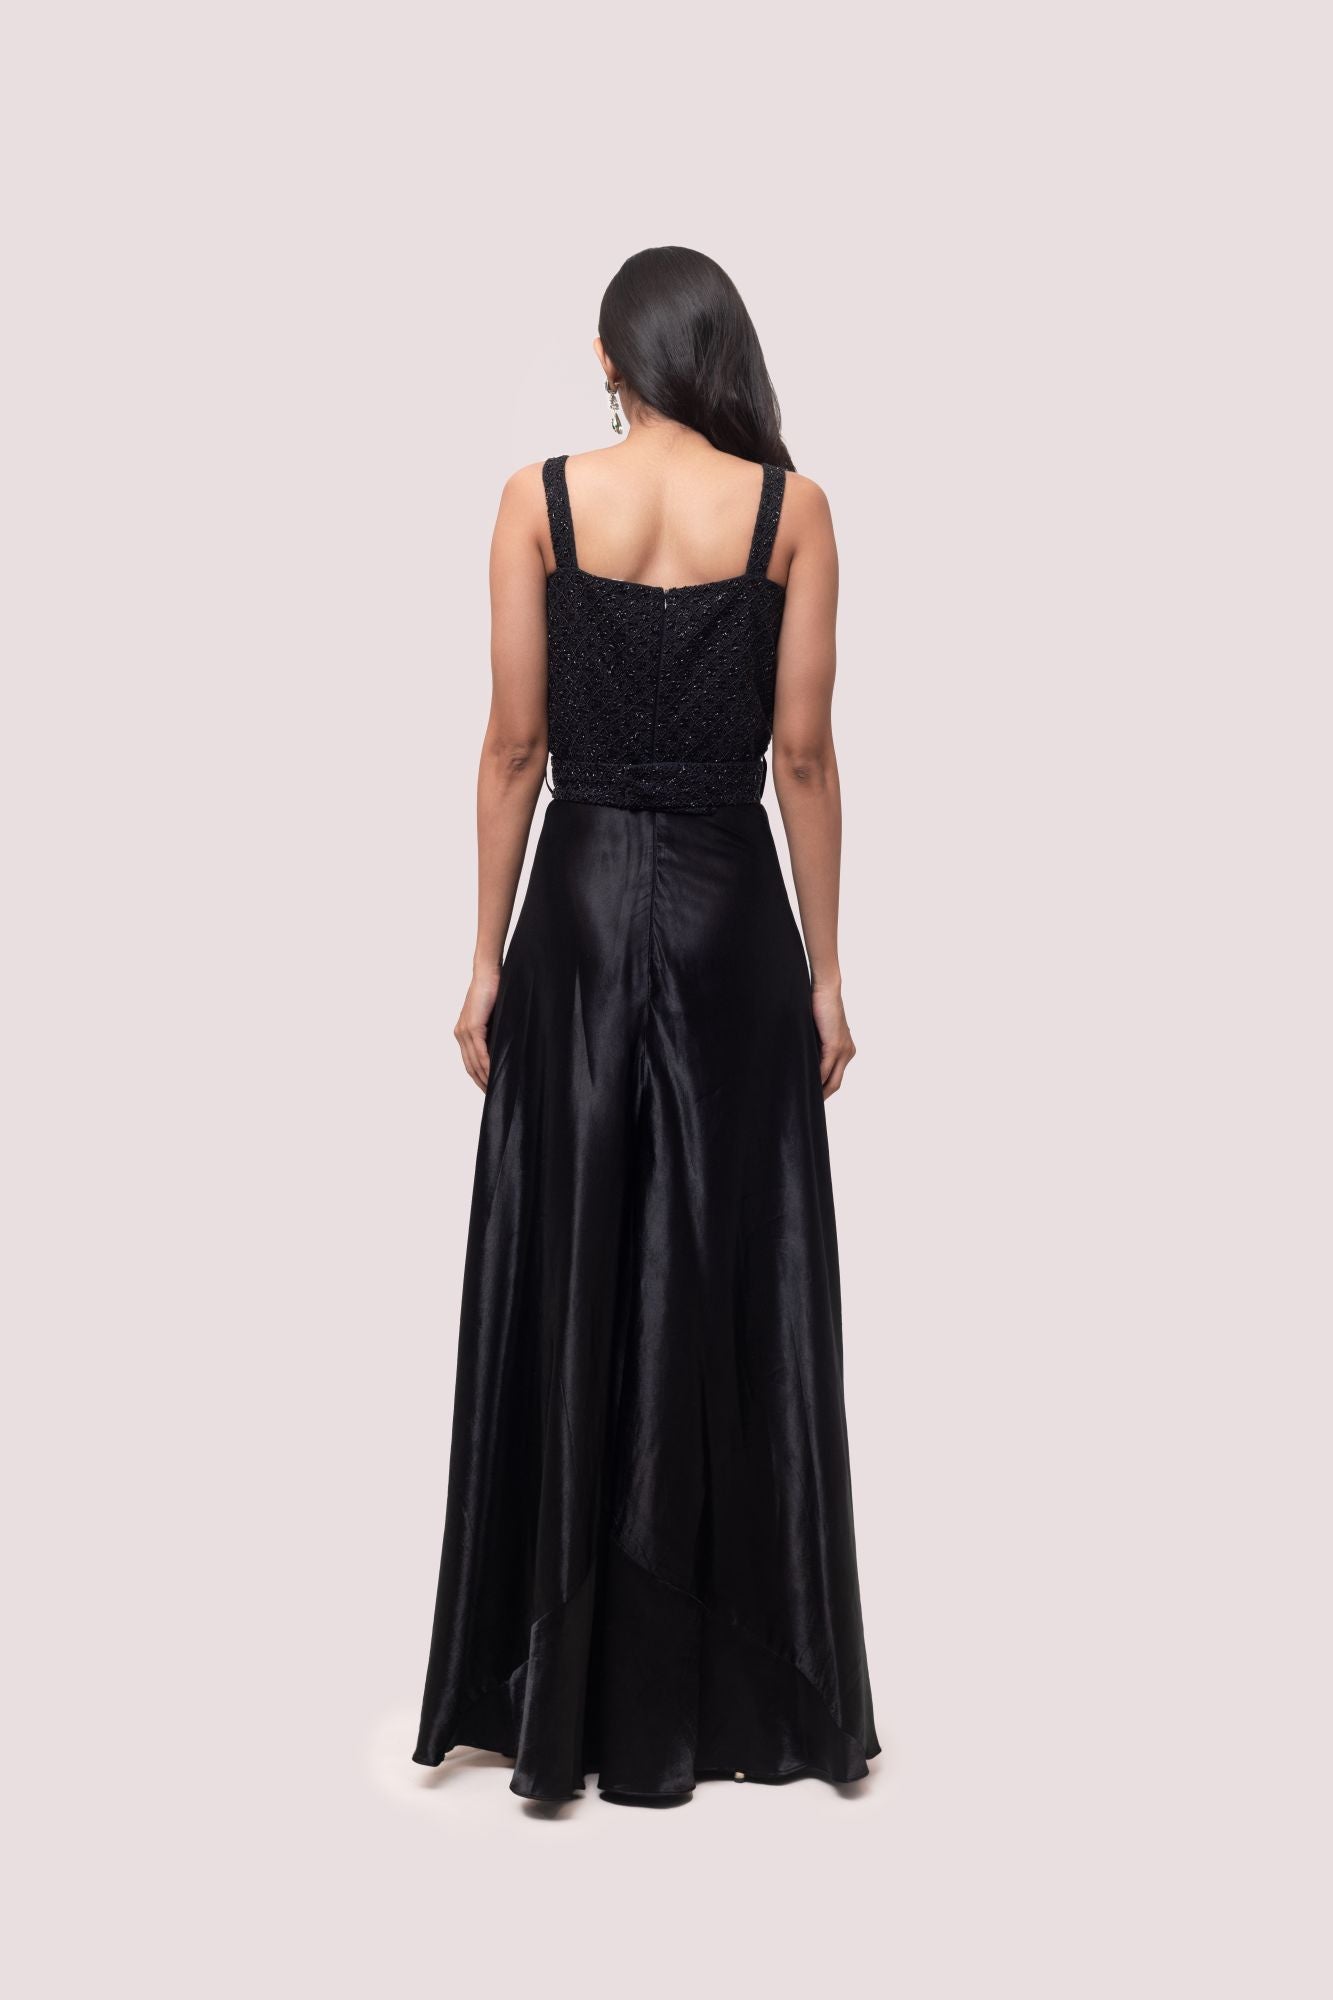 Buy stunning black embellished silk jumpsuit online in USA. Shop the best and latest designs in embroidered sarees, designer sarees, Anarkali suit, lehengas, sharara suits for weddings and special occasions from Pure Elegance Indian fashion store in USA.-back